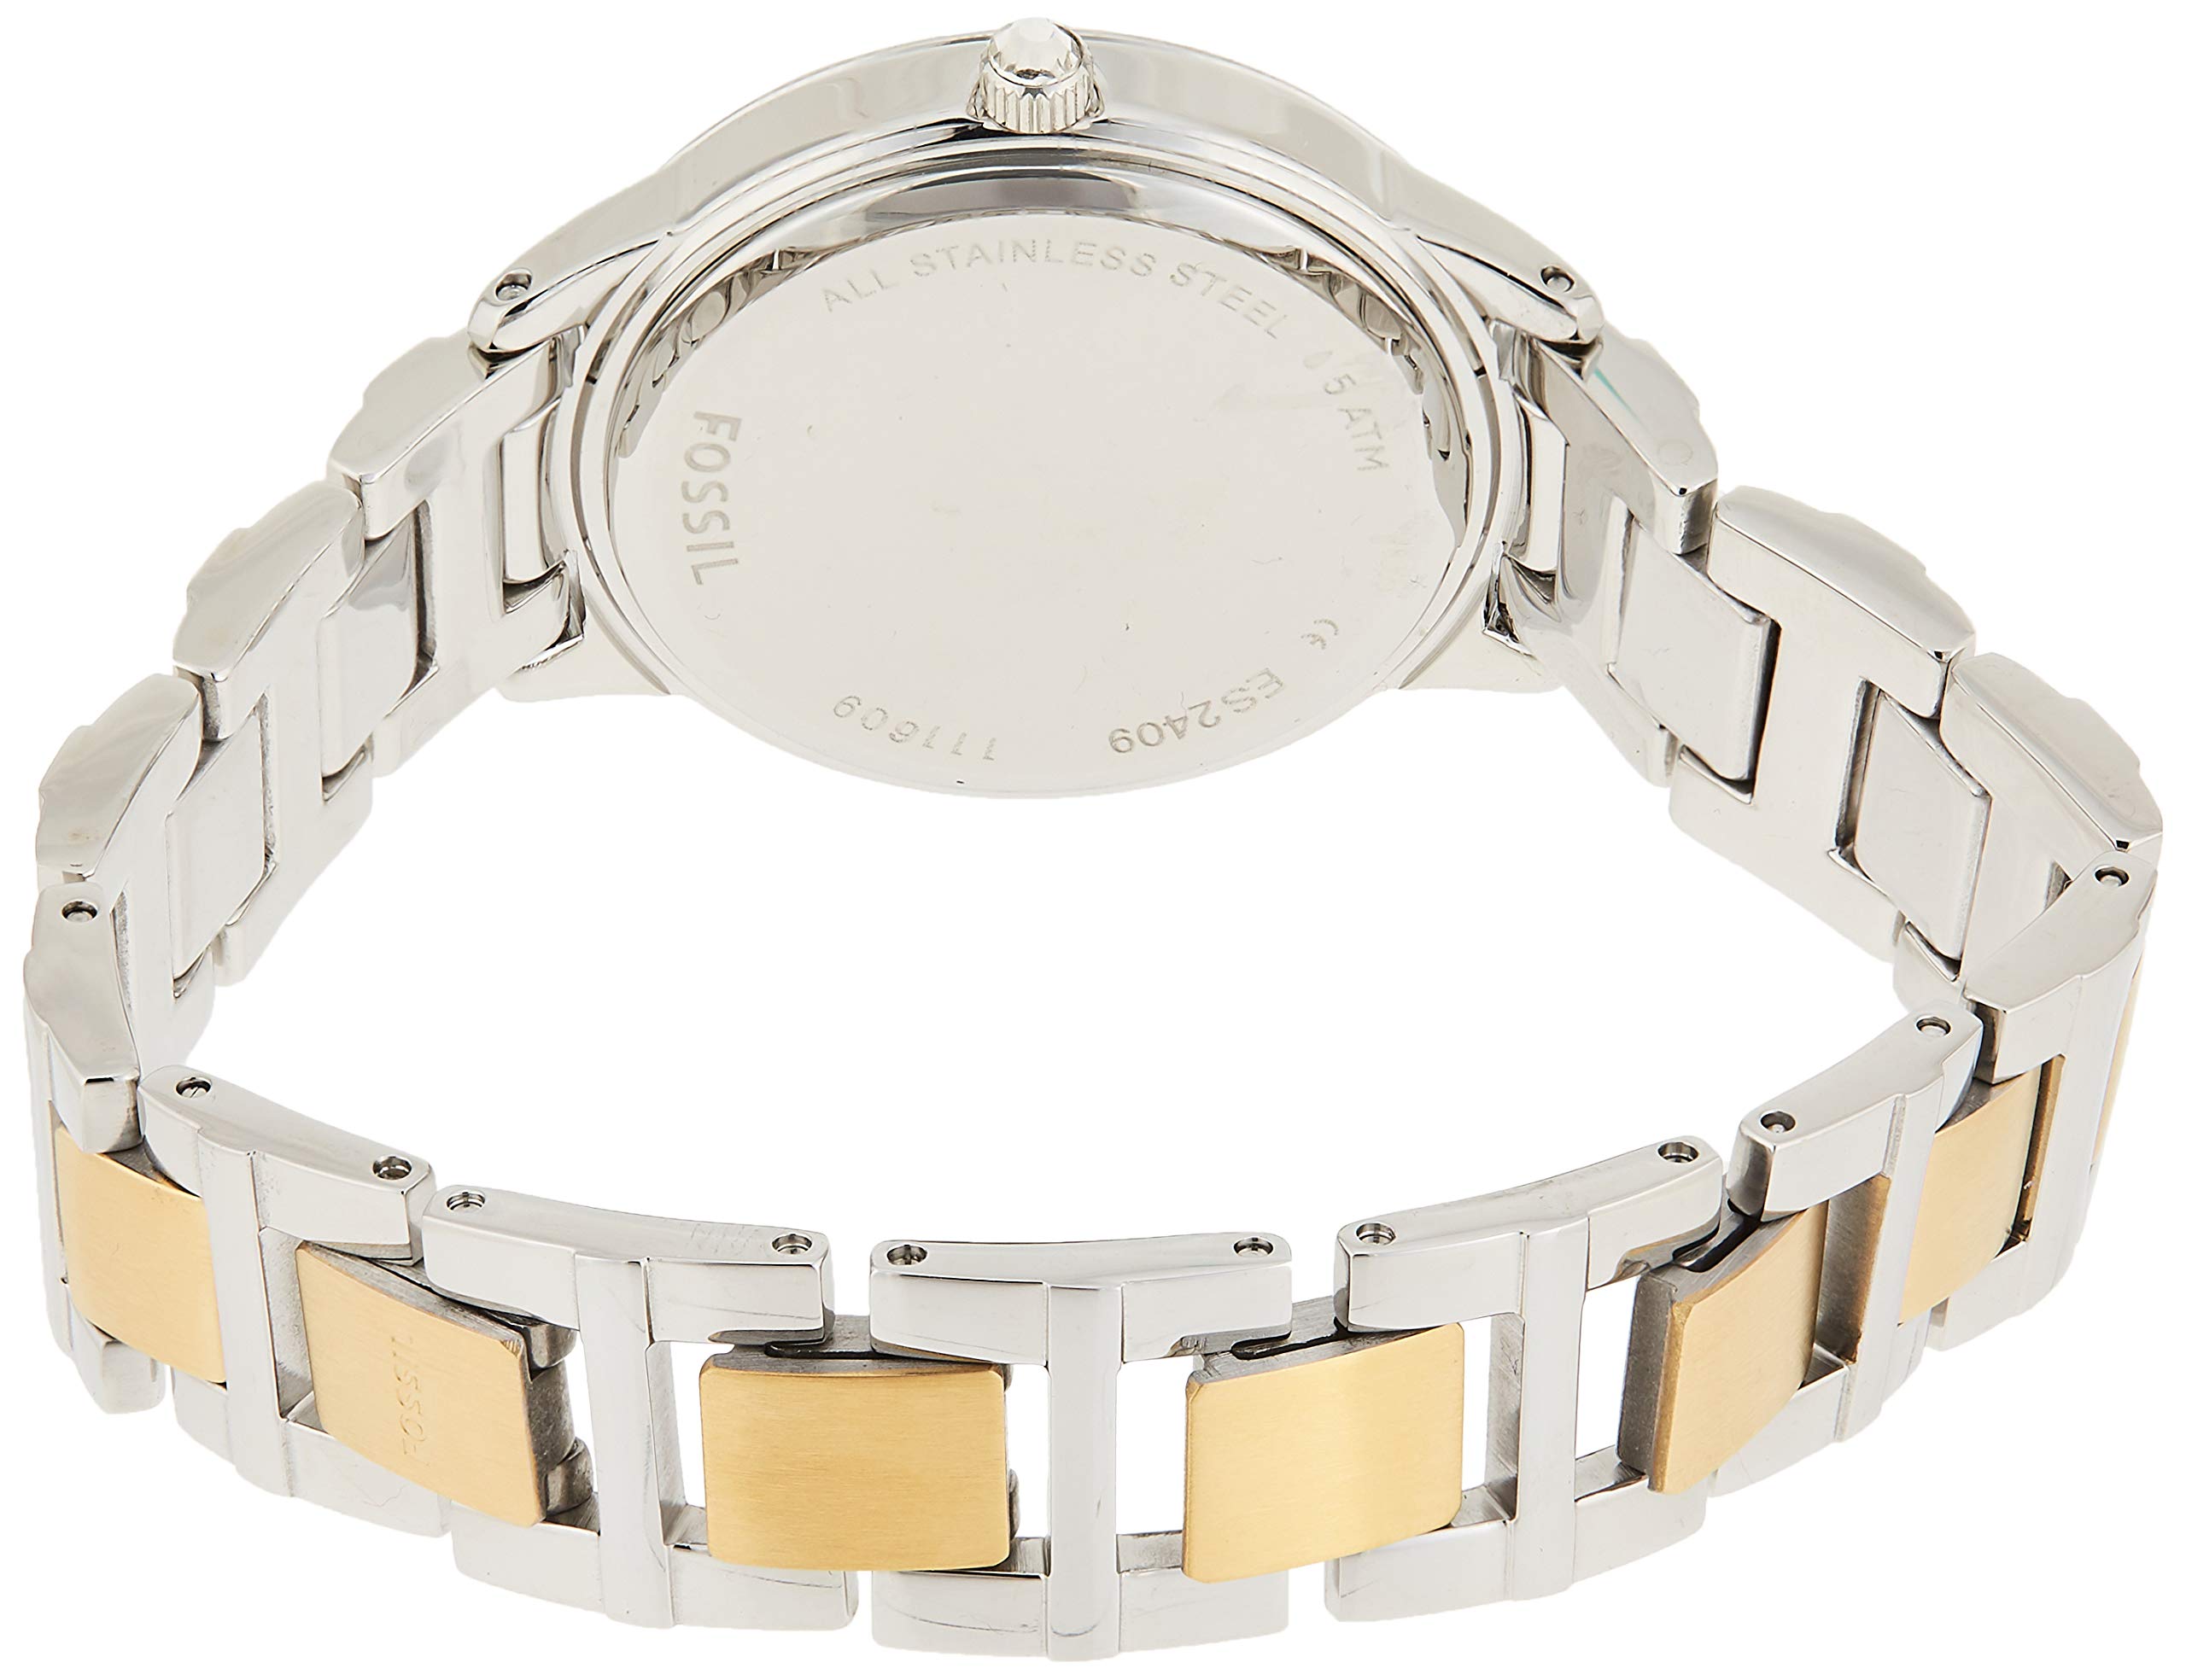 Fossil Women's ES2409 Jesse Two-Tone Stainless Steel Watch with Link Bracelet